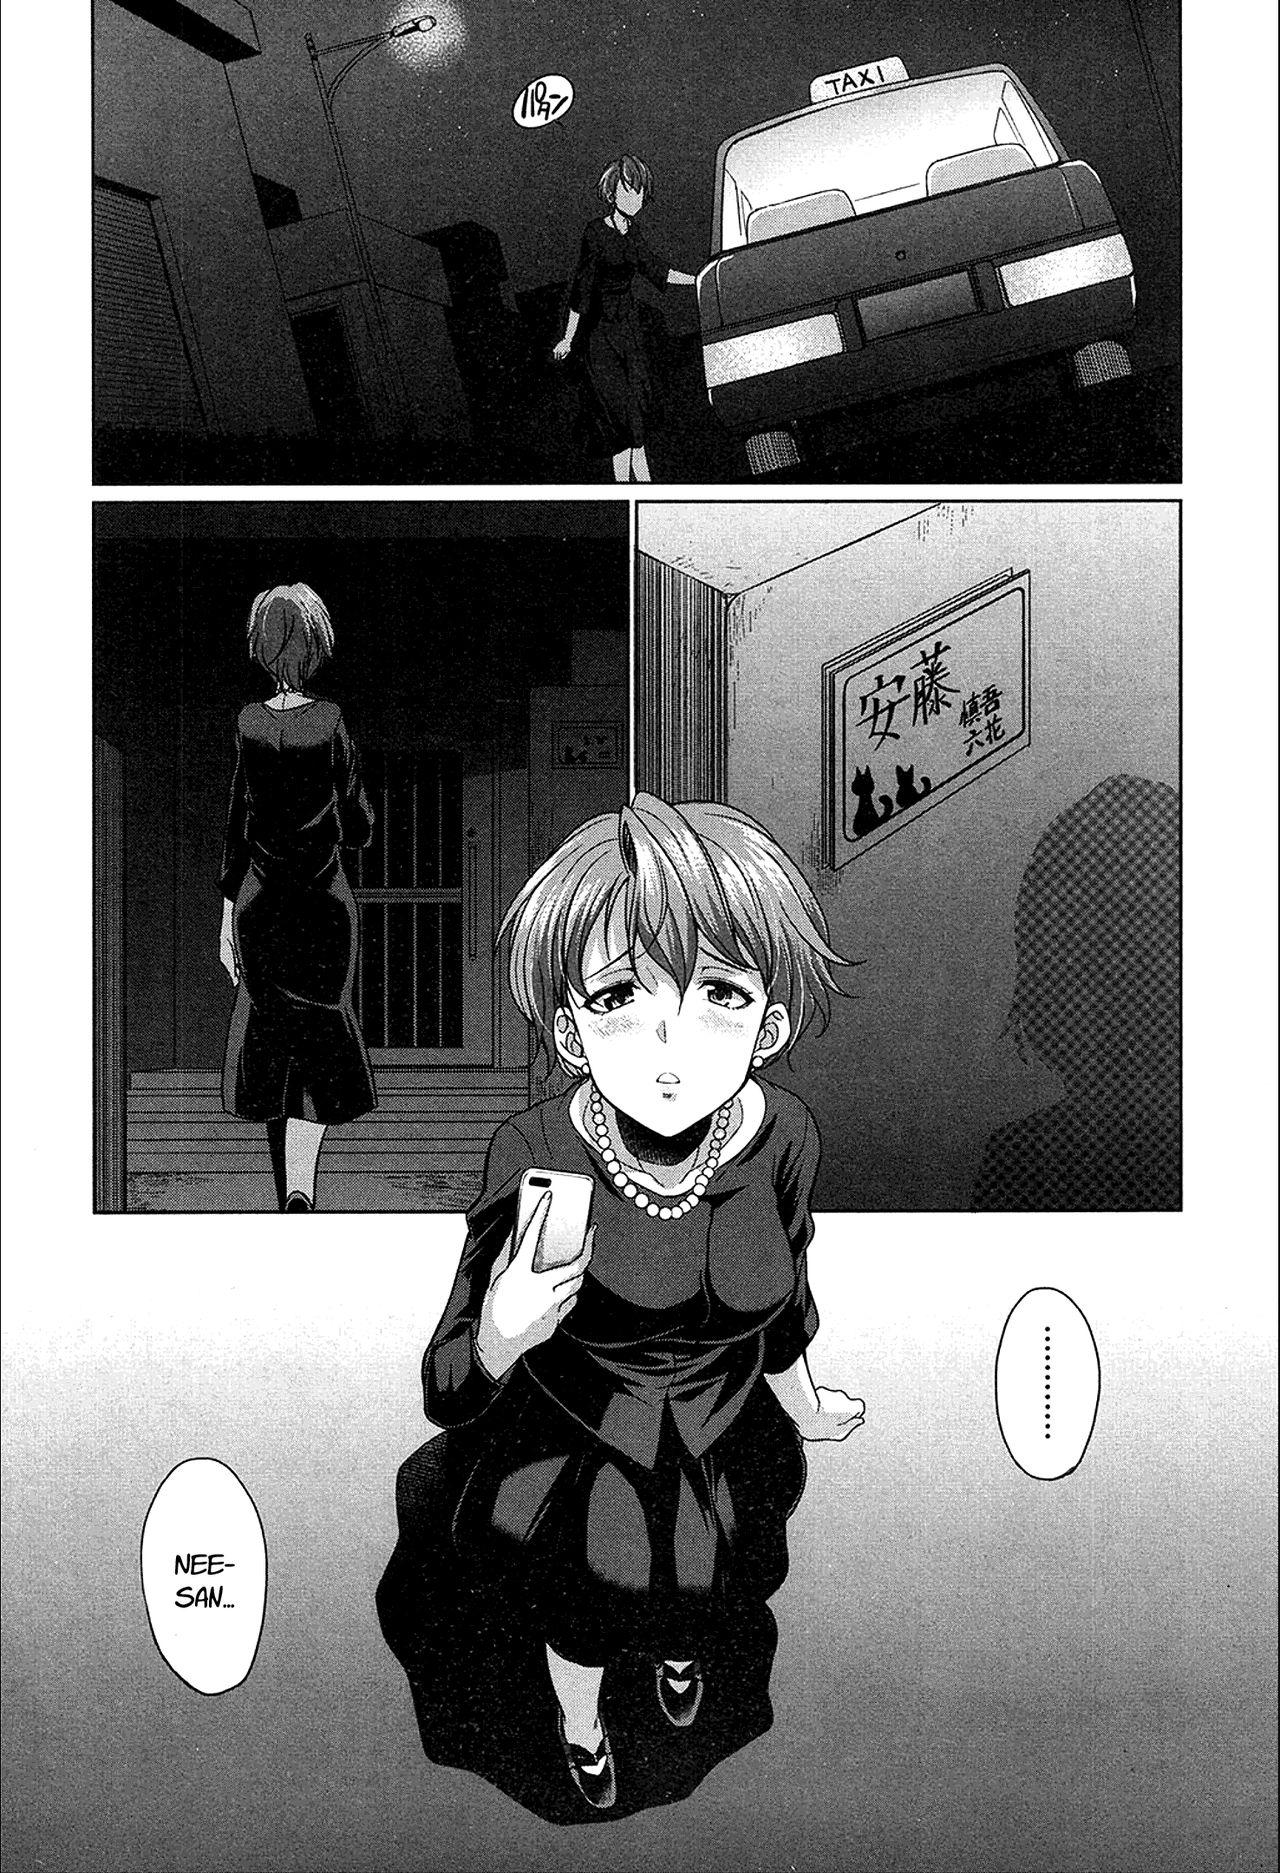 Secretary The Relationship of the Sisters-in-Law [English] [Rewrite] Submissive - Page 5